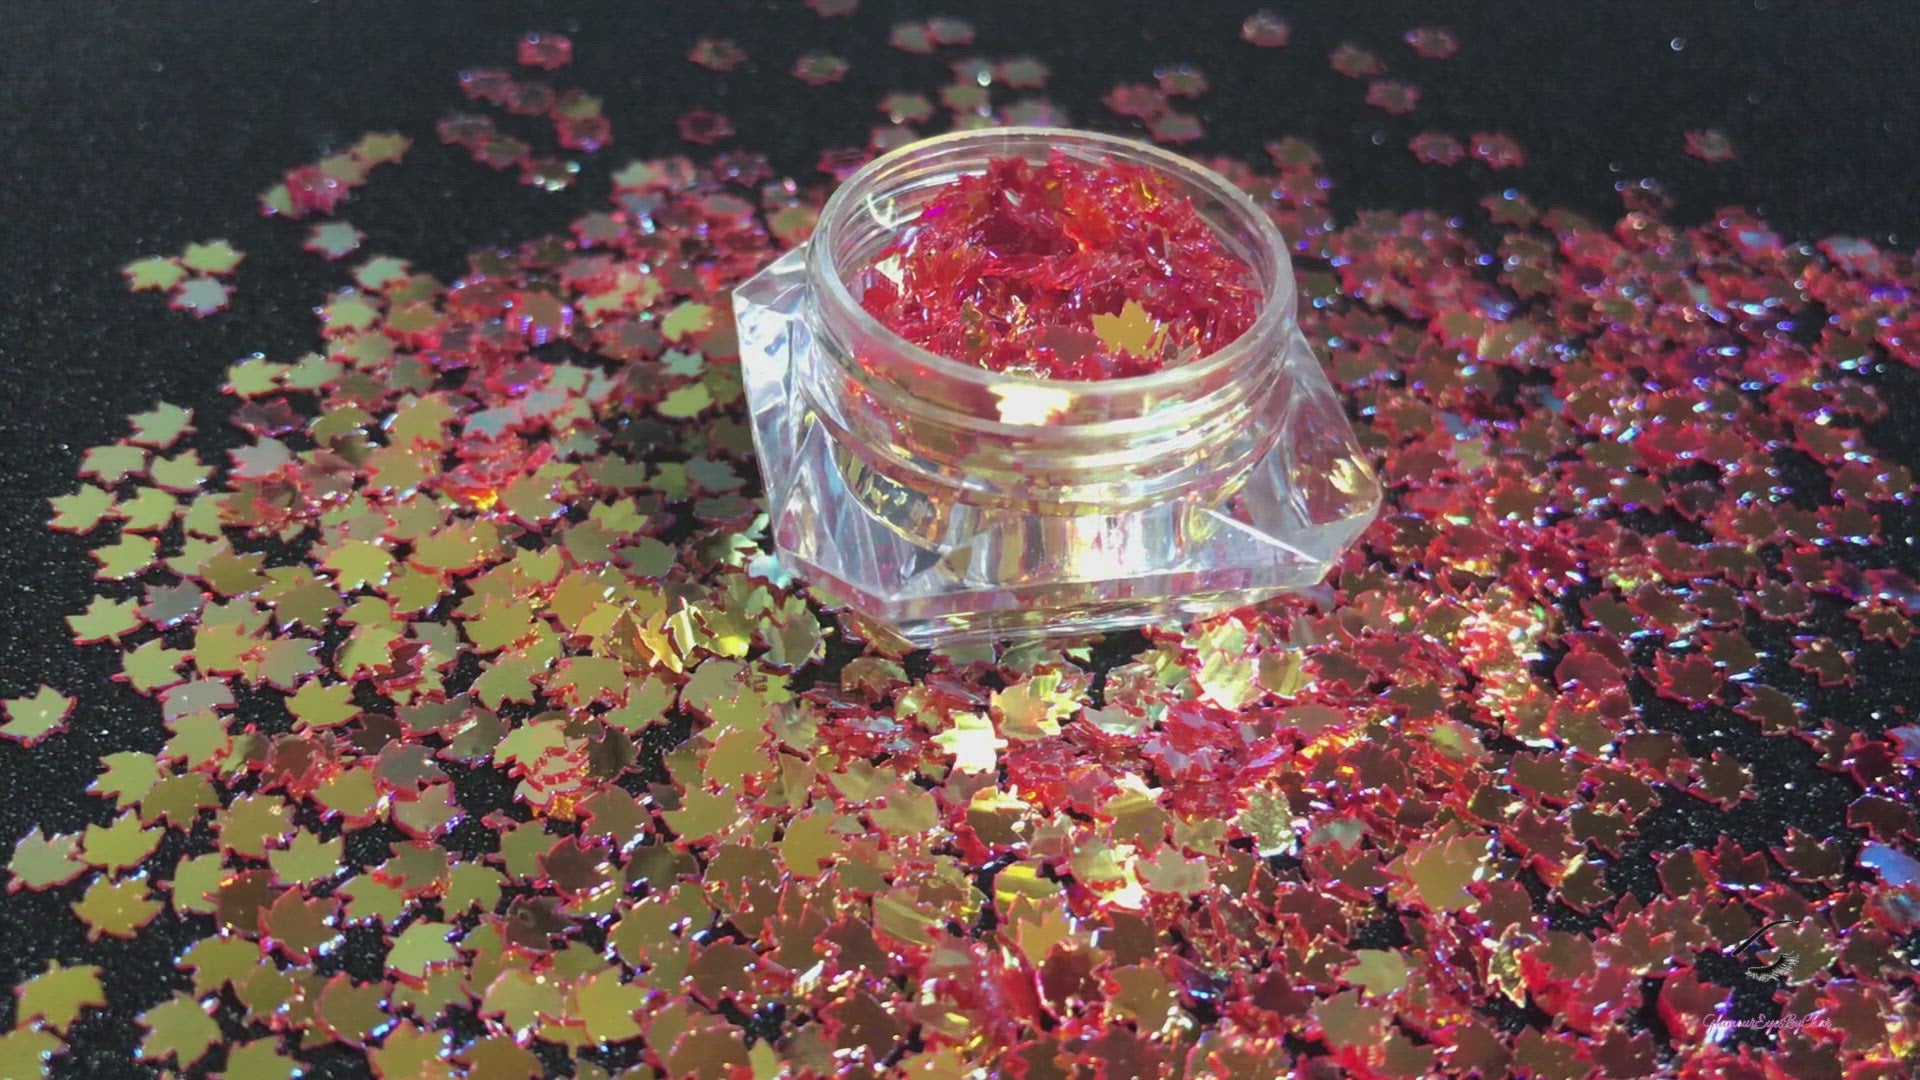 This glitter is called Warm Gold Maple Leafs and is part of the shaped glitters collection. It consists of warm red orange 4.0mm maple leafs with a gold sparkle. Warm Gold Maple Leafs is perfect for body and nail art or DIY projects. Comes in 5g jars only.